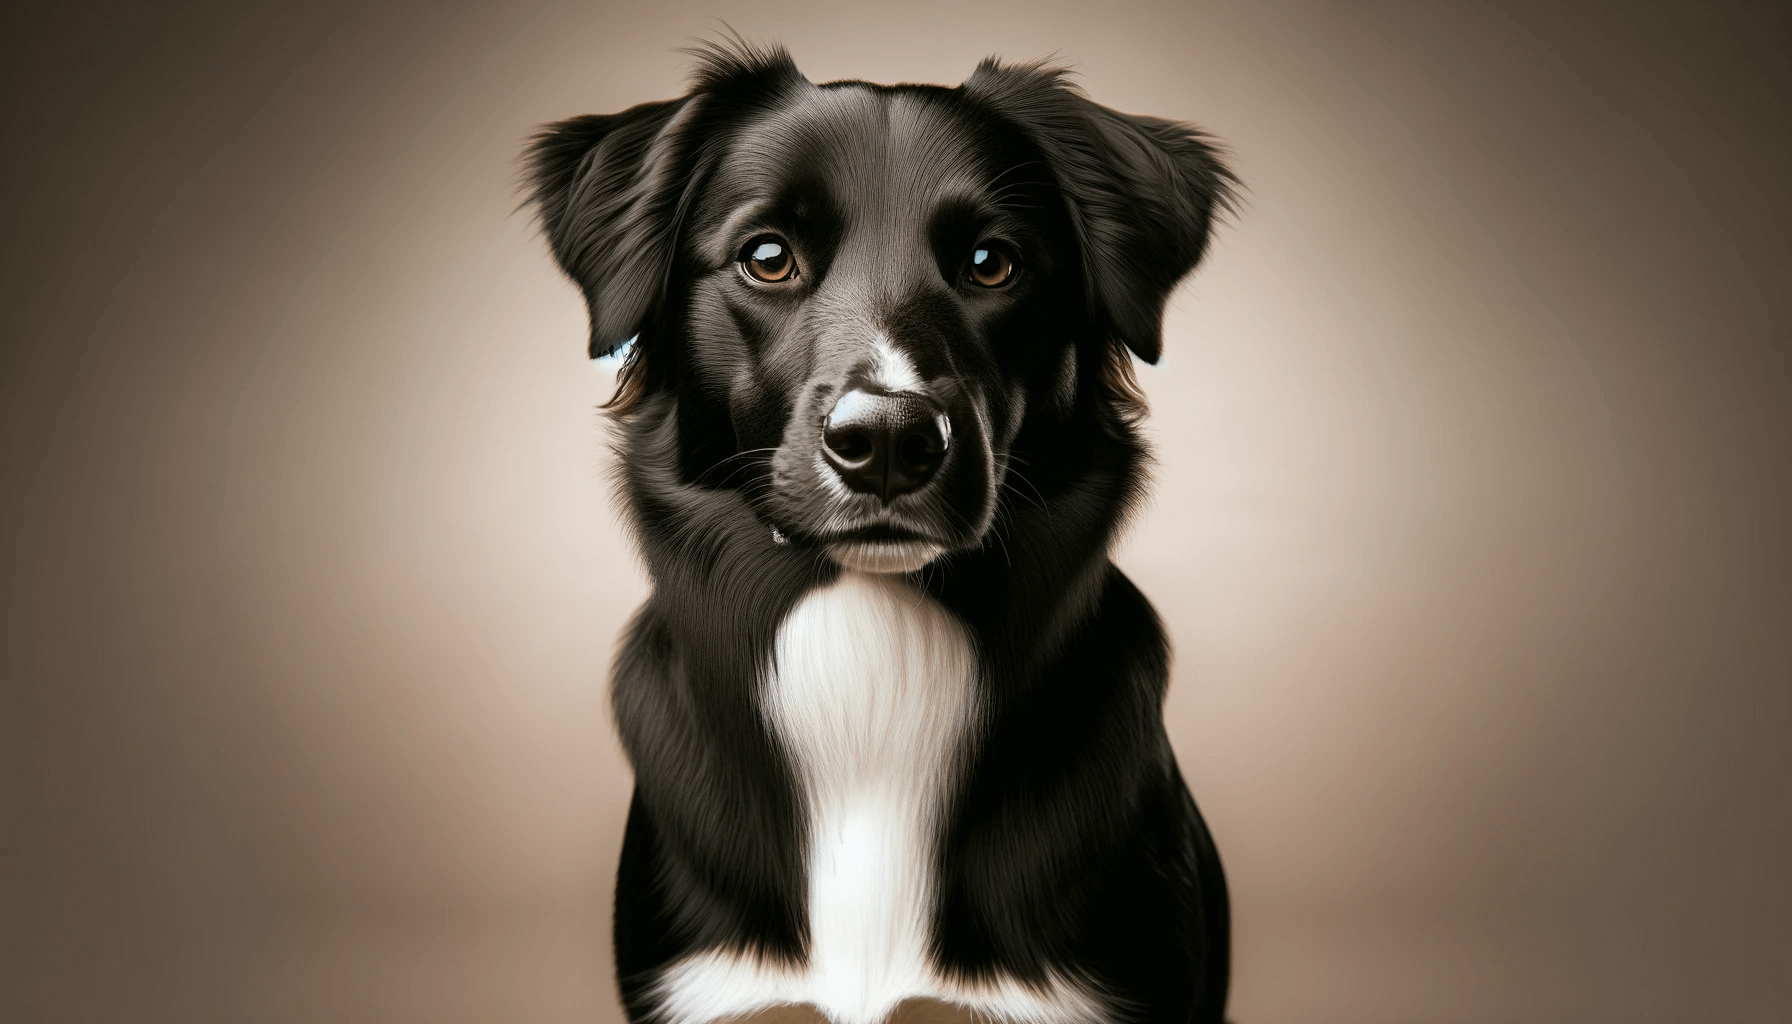 Borador Border Collie Lab Mix with a sleek black coat and a white chest, a classic Lab feature. The dog is sitting attentively with bright, eager eyes.